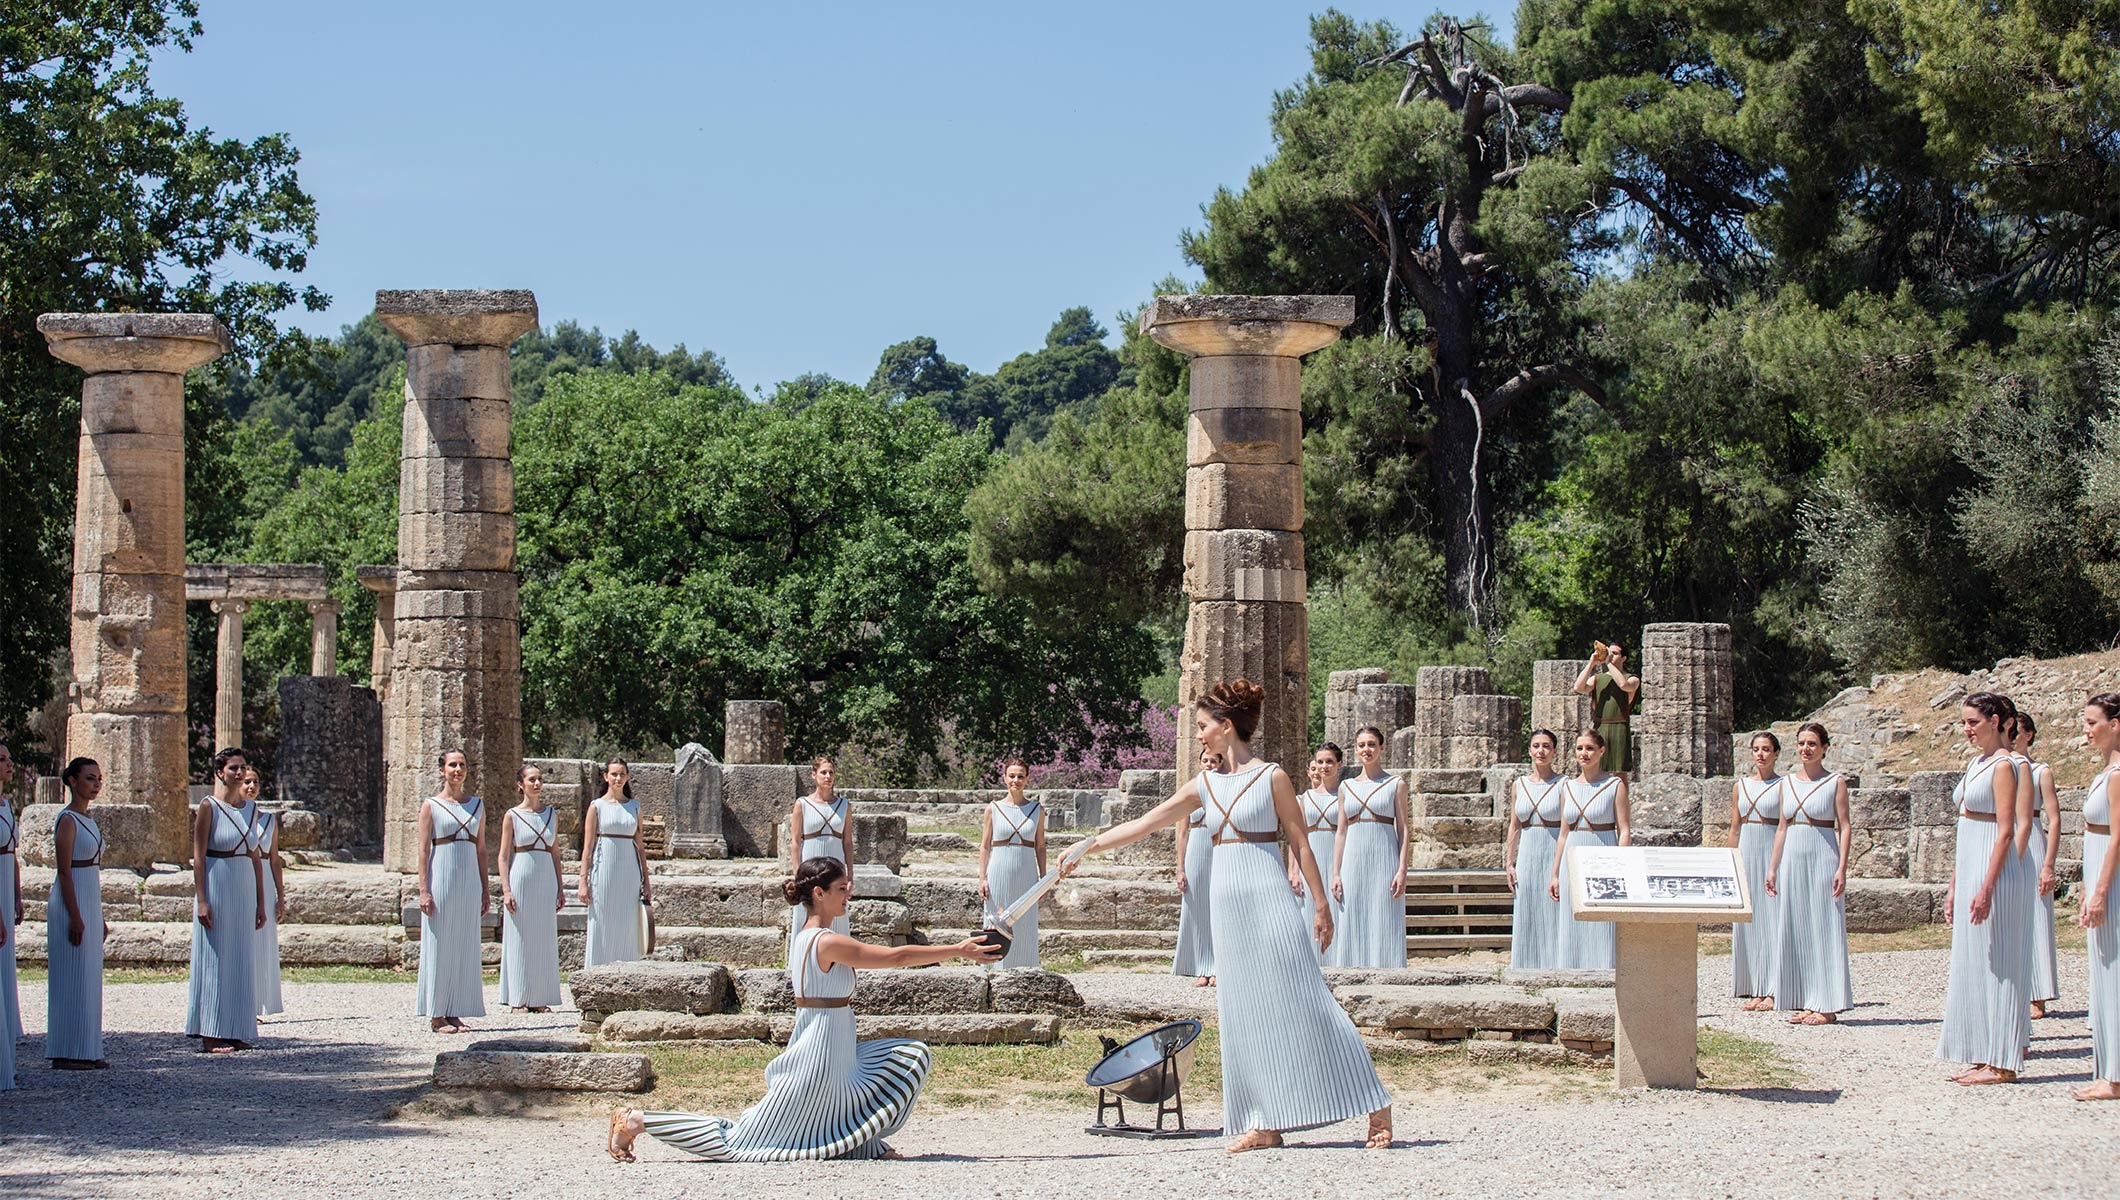 Olympic Flame: Temple of Hera, Olympia, The ceremony of lighting the flame of the XXXII Summer Olympic Games, Greece. 2120x1200 HD Background.